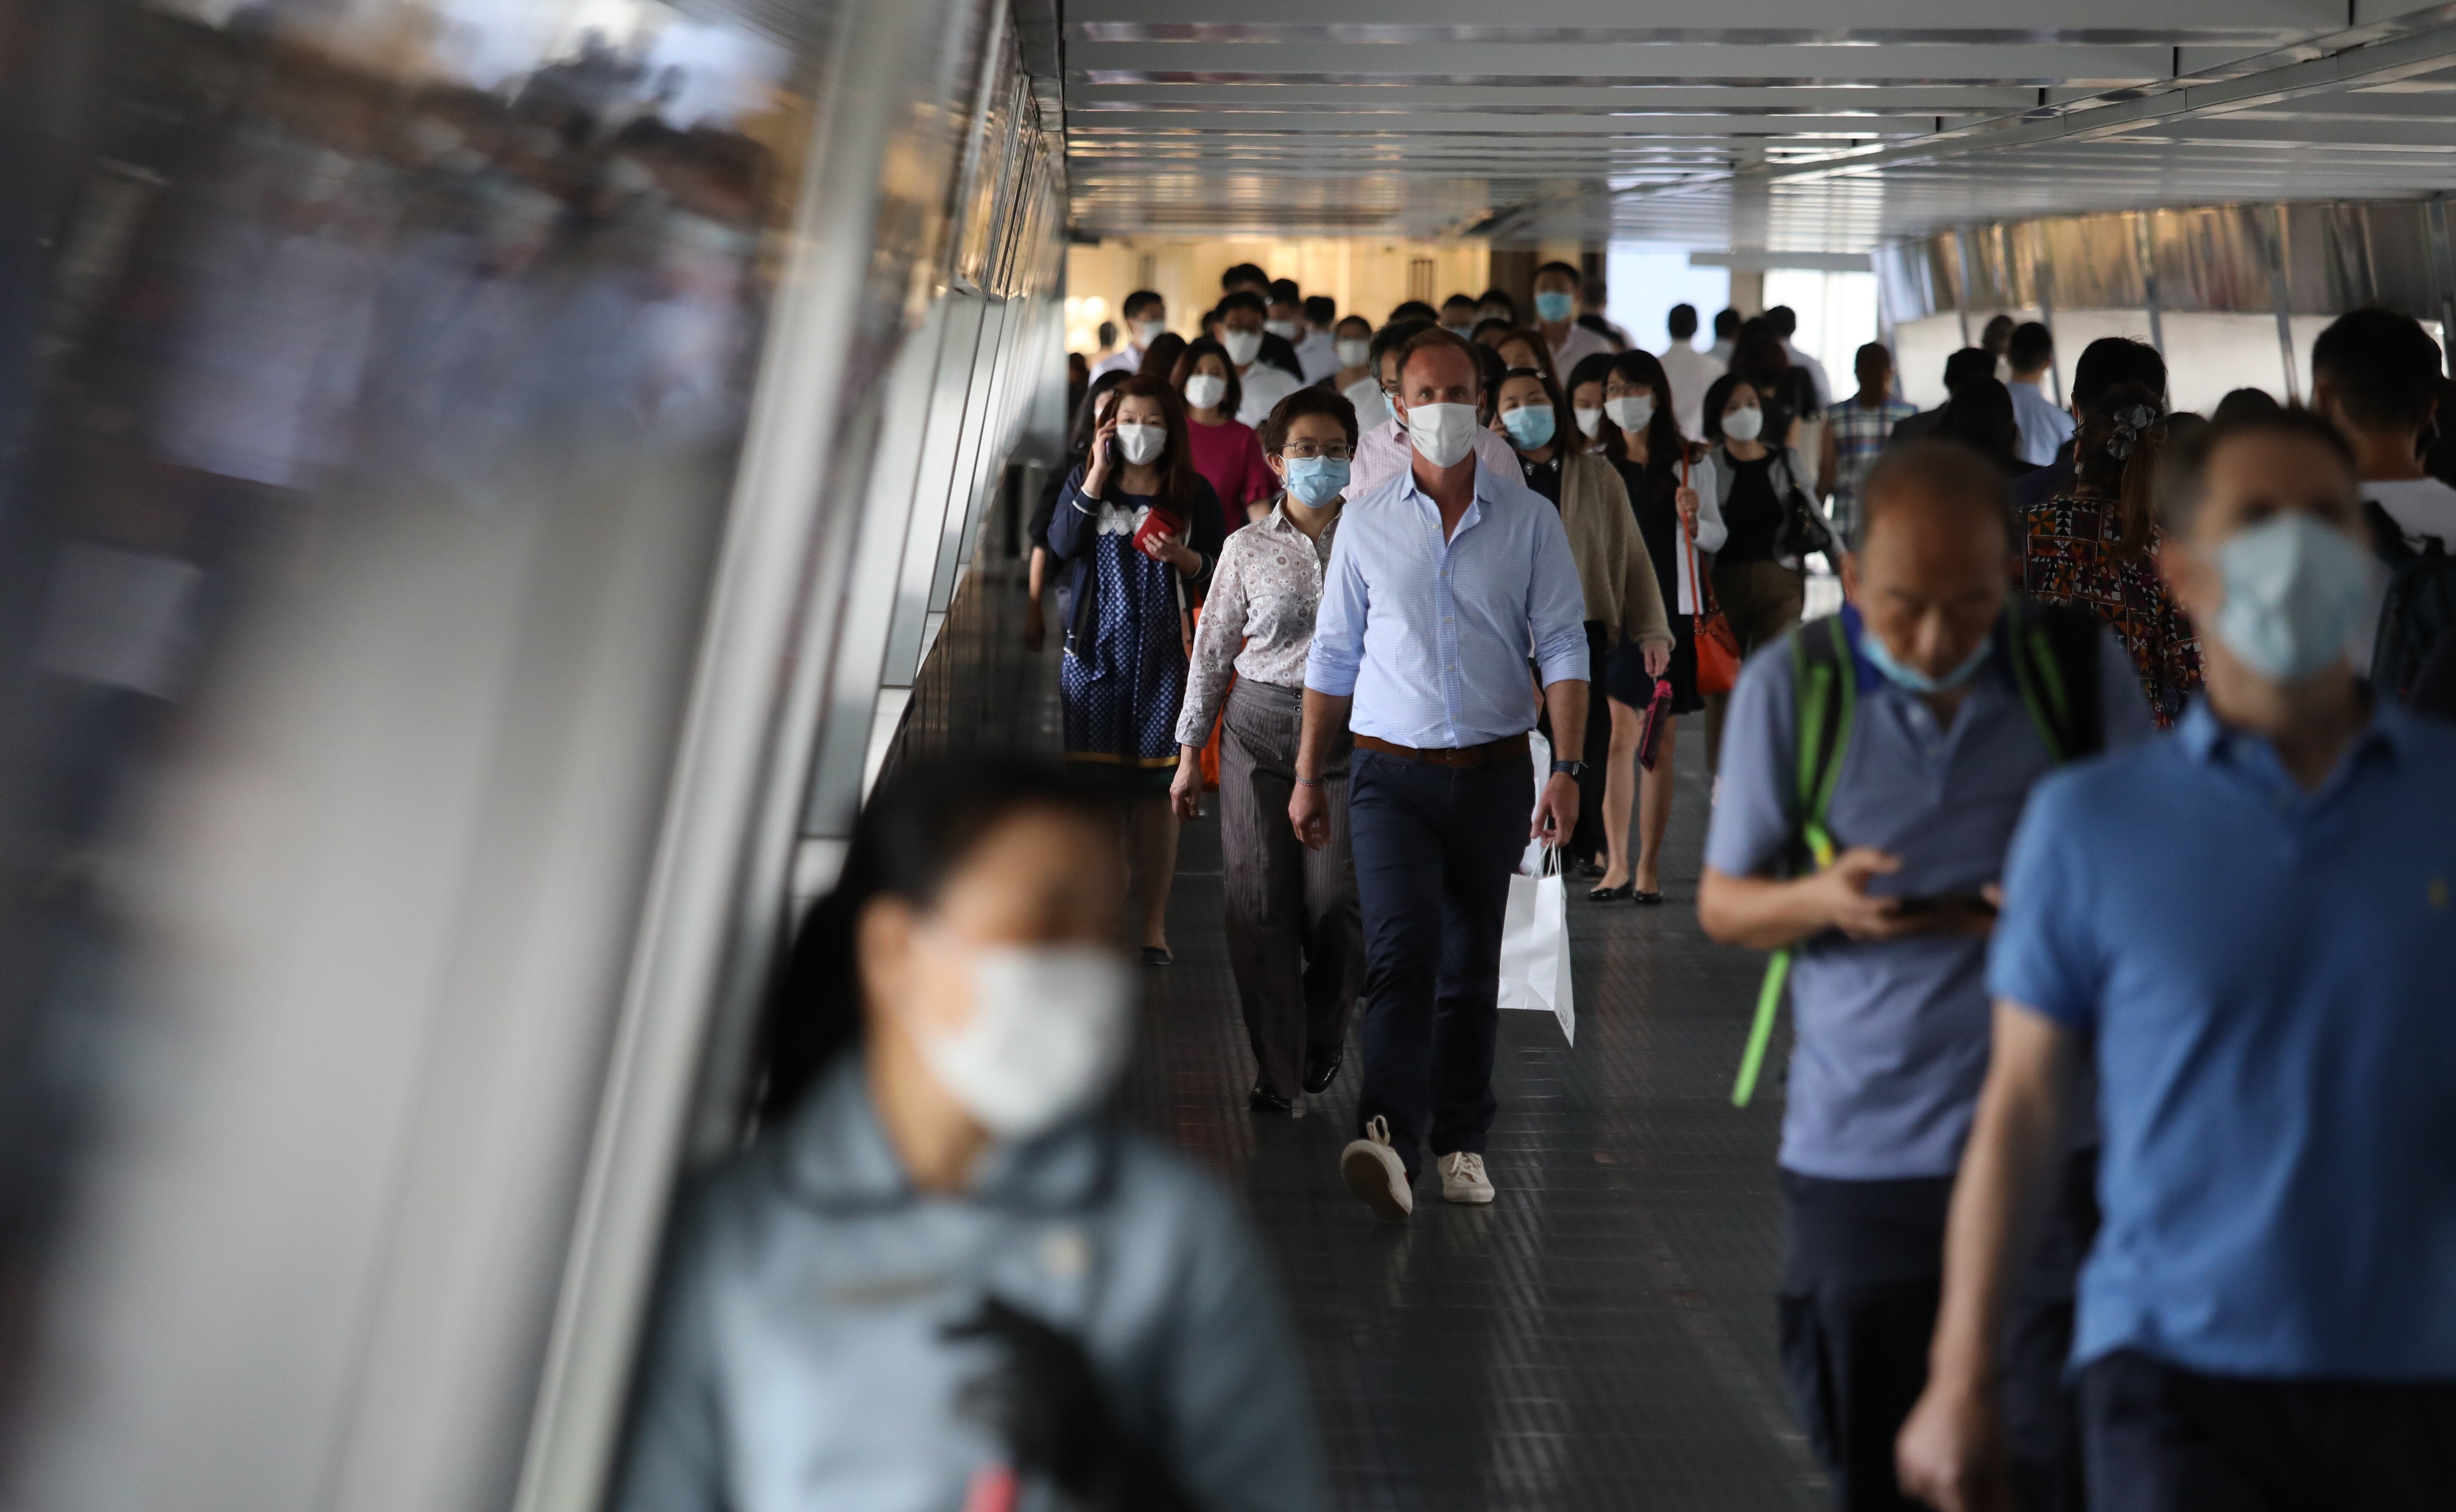 Pedestrians at a footbridge in Central on 19 May 2020. Photo: Nora Tam